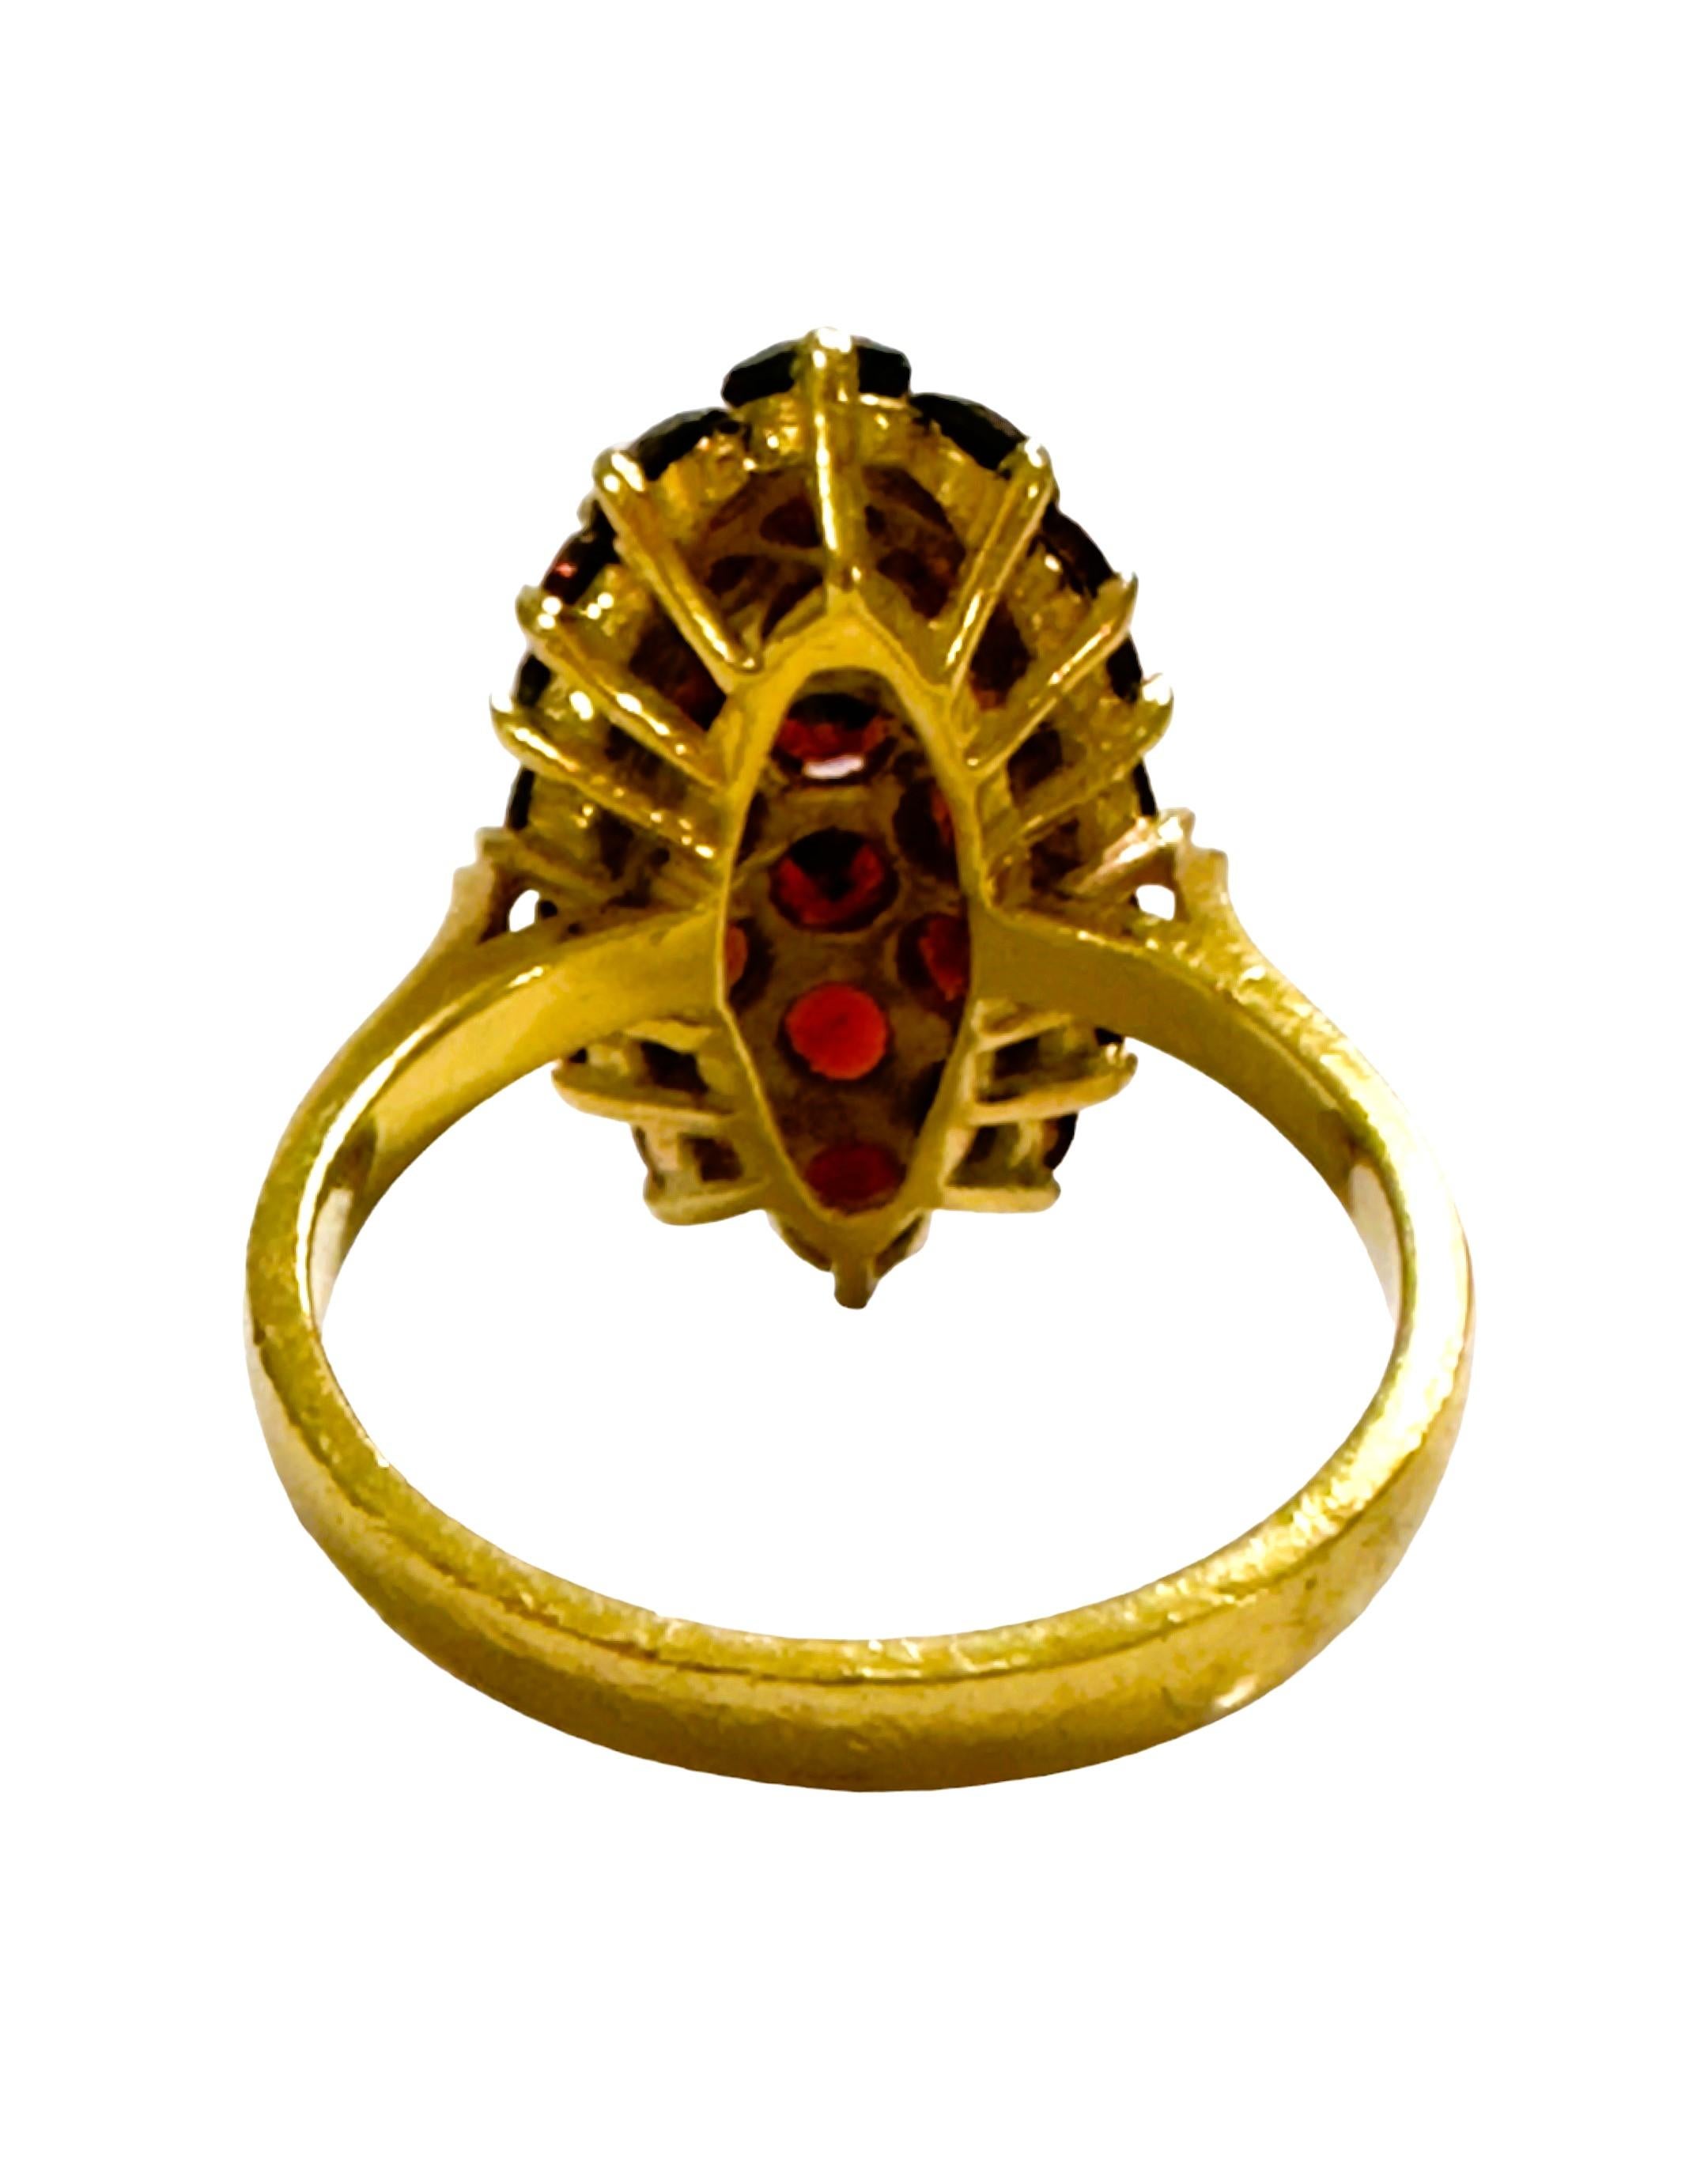 18K Italian Yellow Gold  Vintage Marquis Shaped Dome Garnet Ring with Appraisal 2